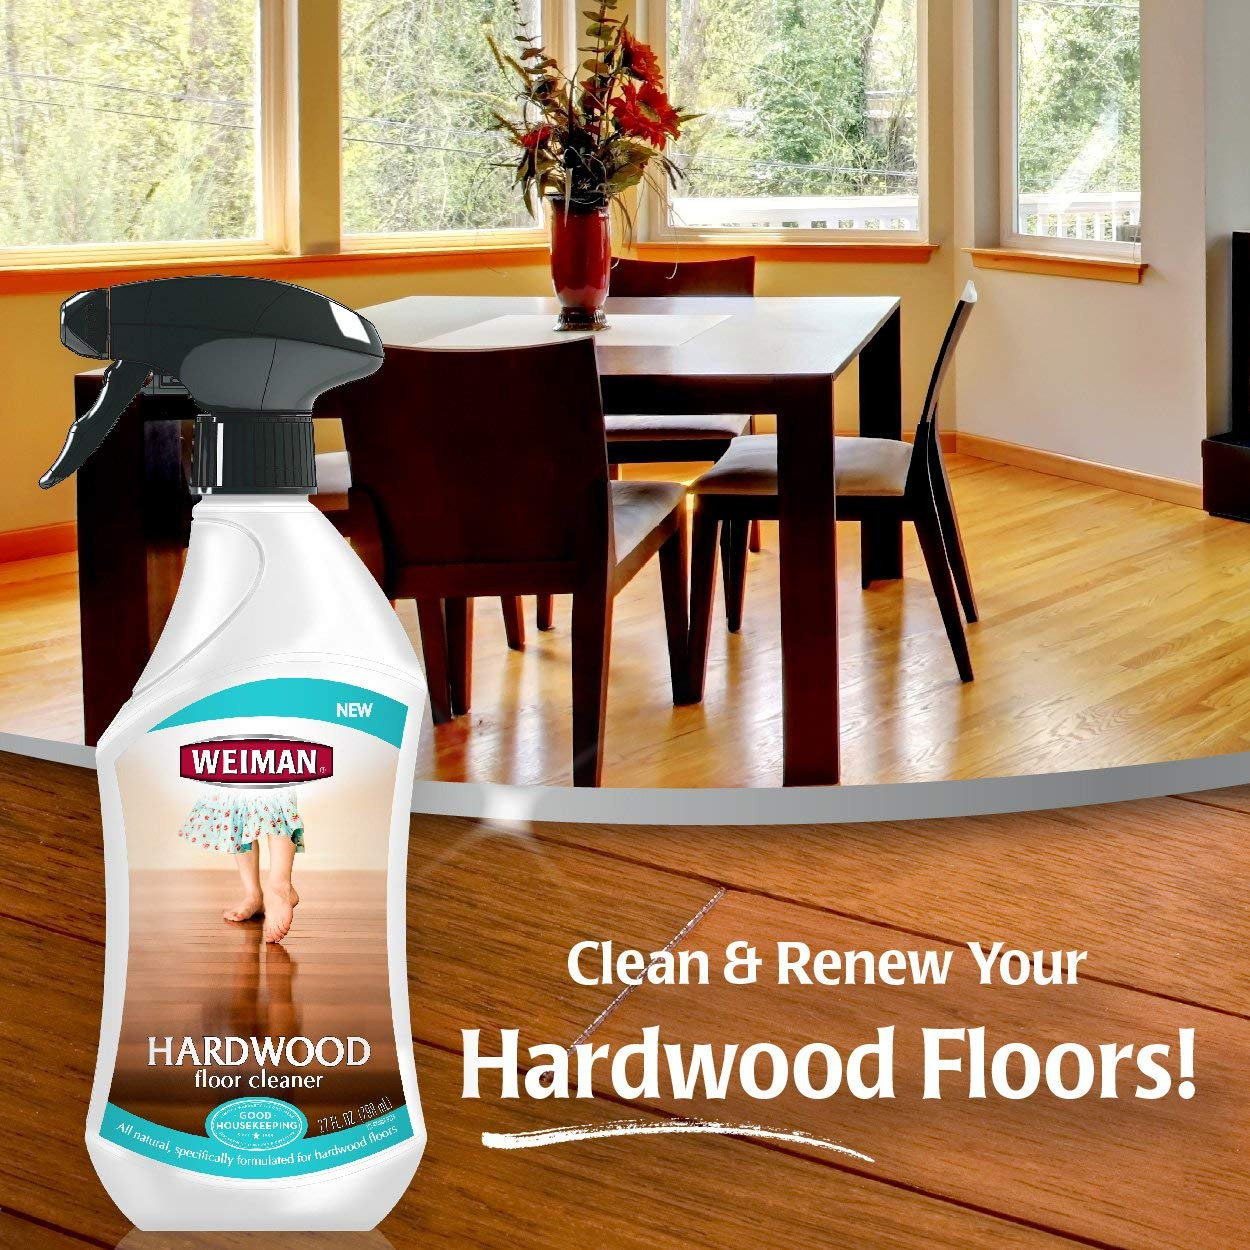 carpet and hardwood floor cleaning companies of amazon com weiman hardwood floor cleaner surface safe no harsh regarding amazon com weiman hardwood floor cleaner surface safe no harsh scent safe for use around kids and pets residue free 27 oz trigger home kitchen